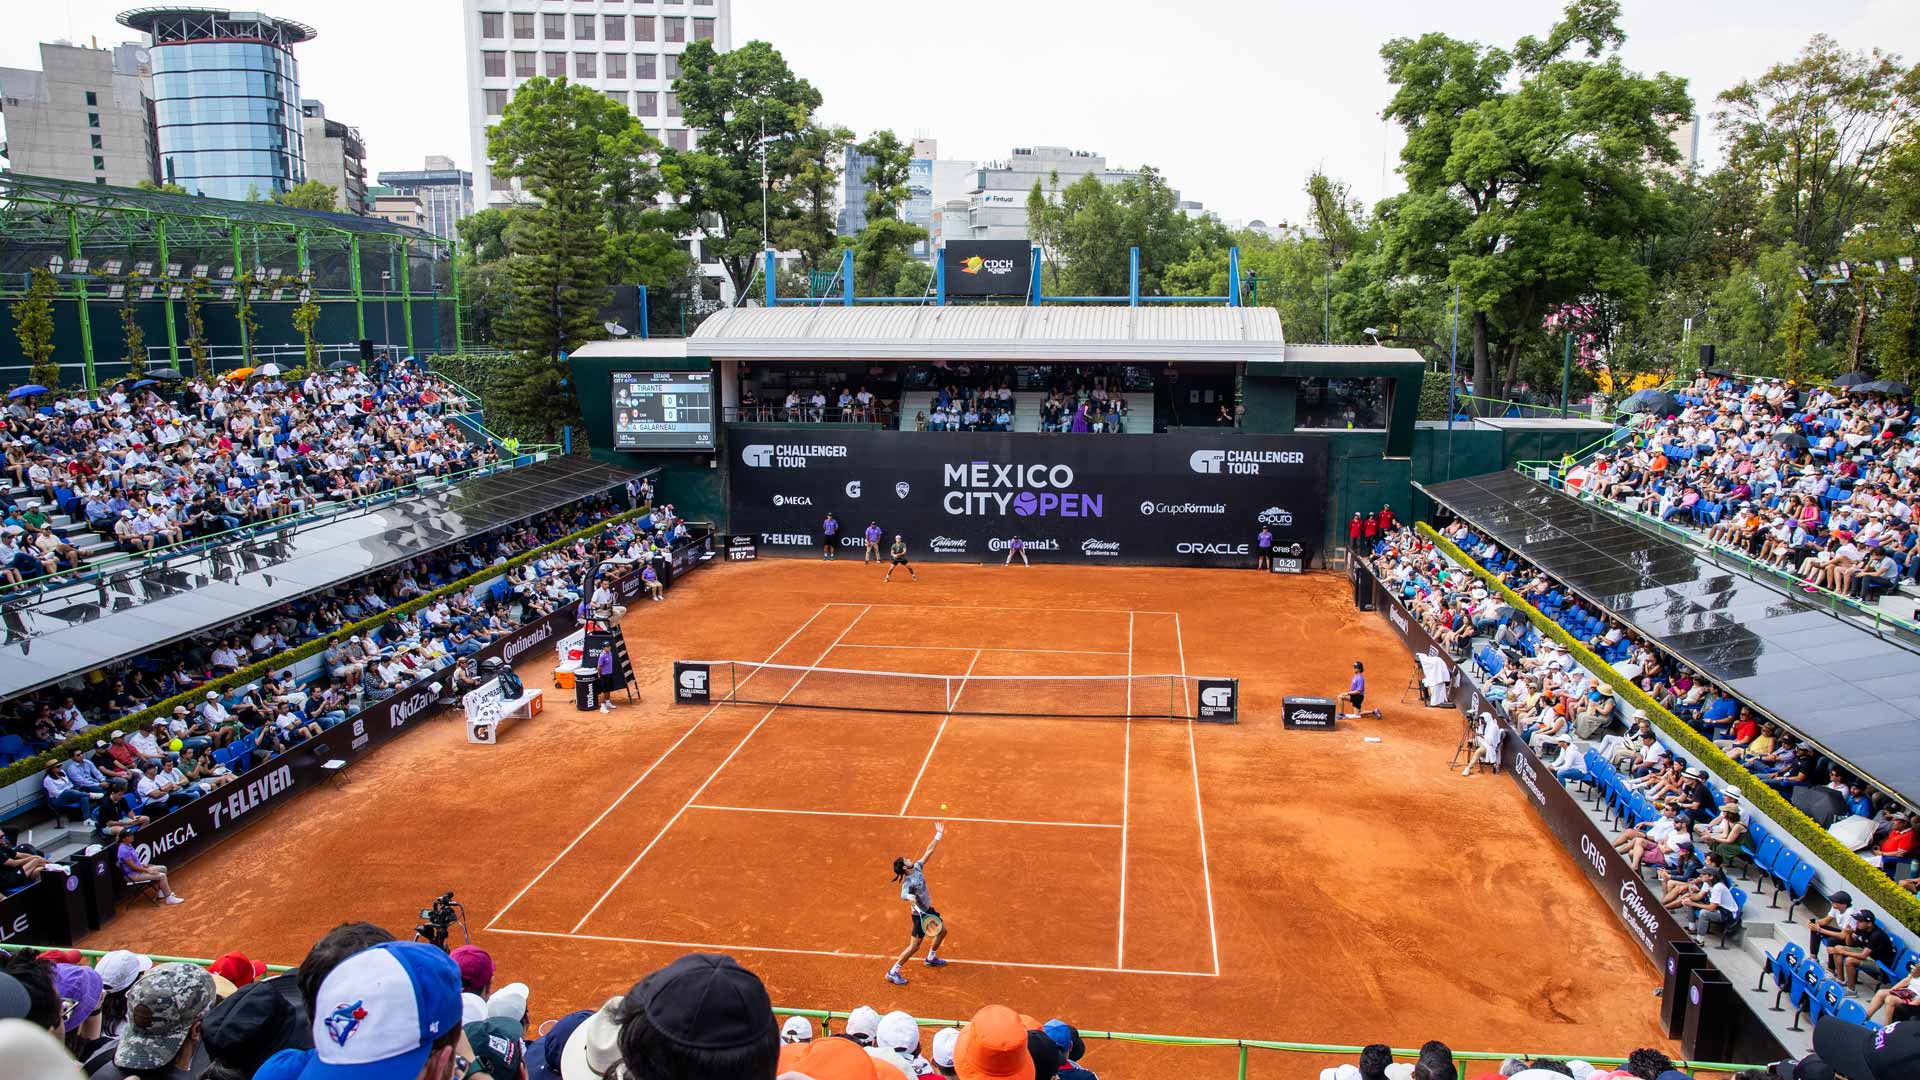 The Mexico City Open is an ATP Challenger Tour 125 event.